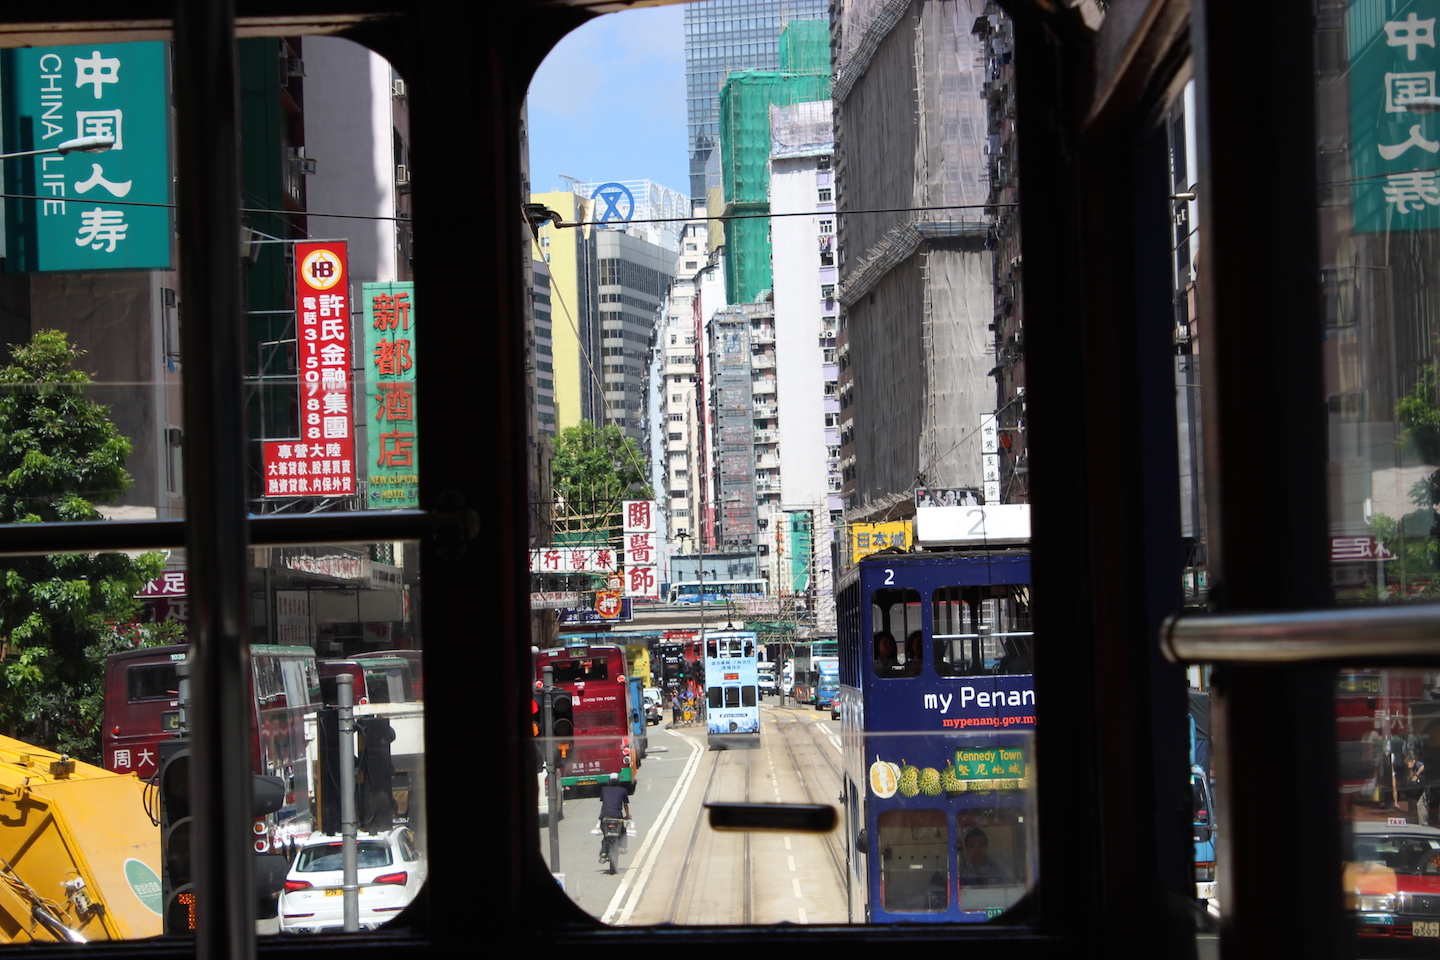 View from inside a Hong Kong Tram. It's possible to have a good view of the various neighbourhoods in Hong Kong island while riding the tram!